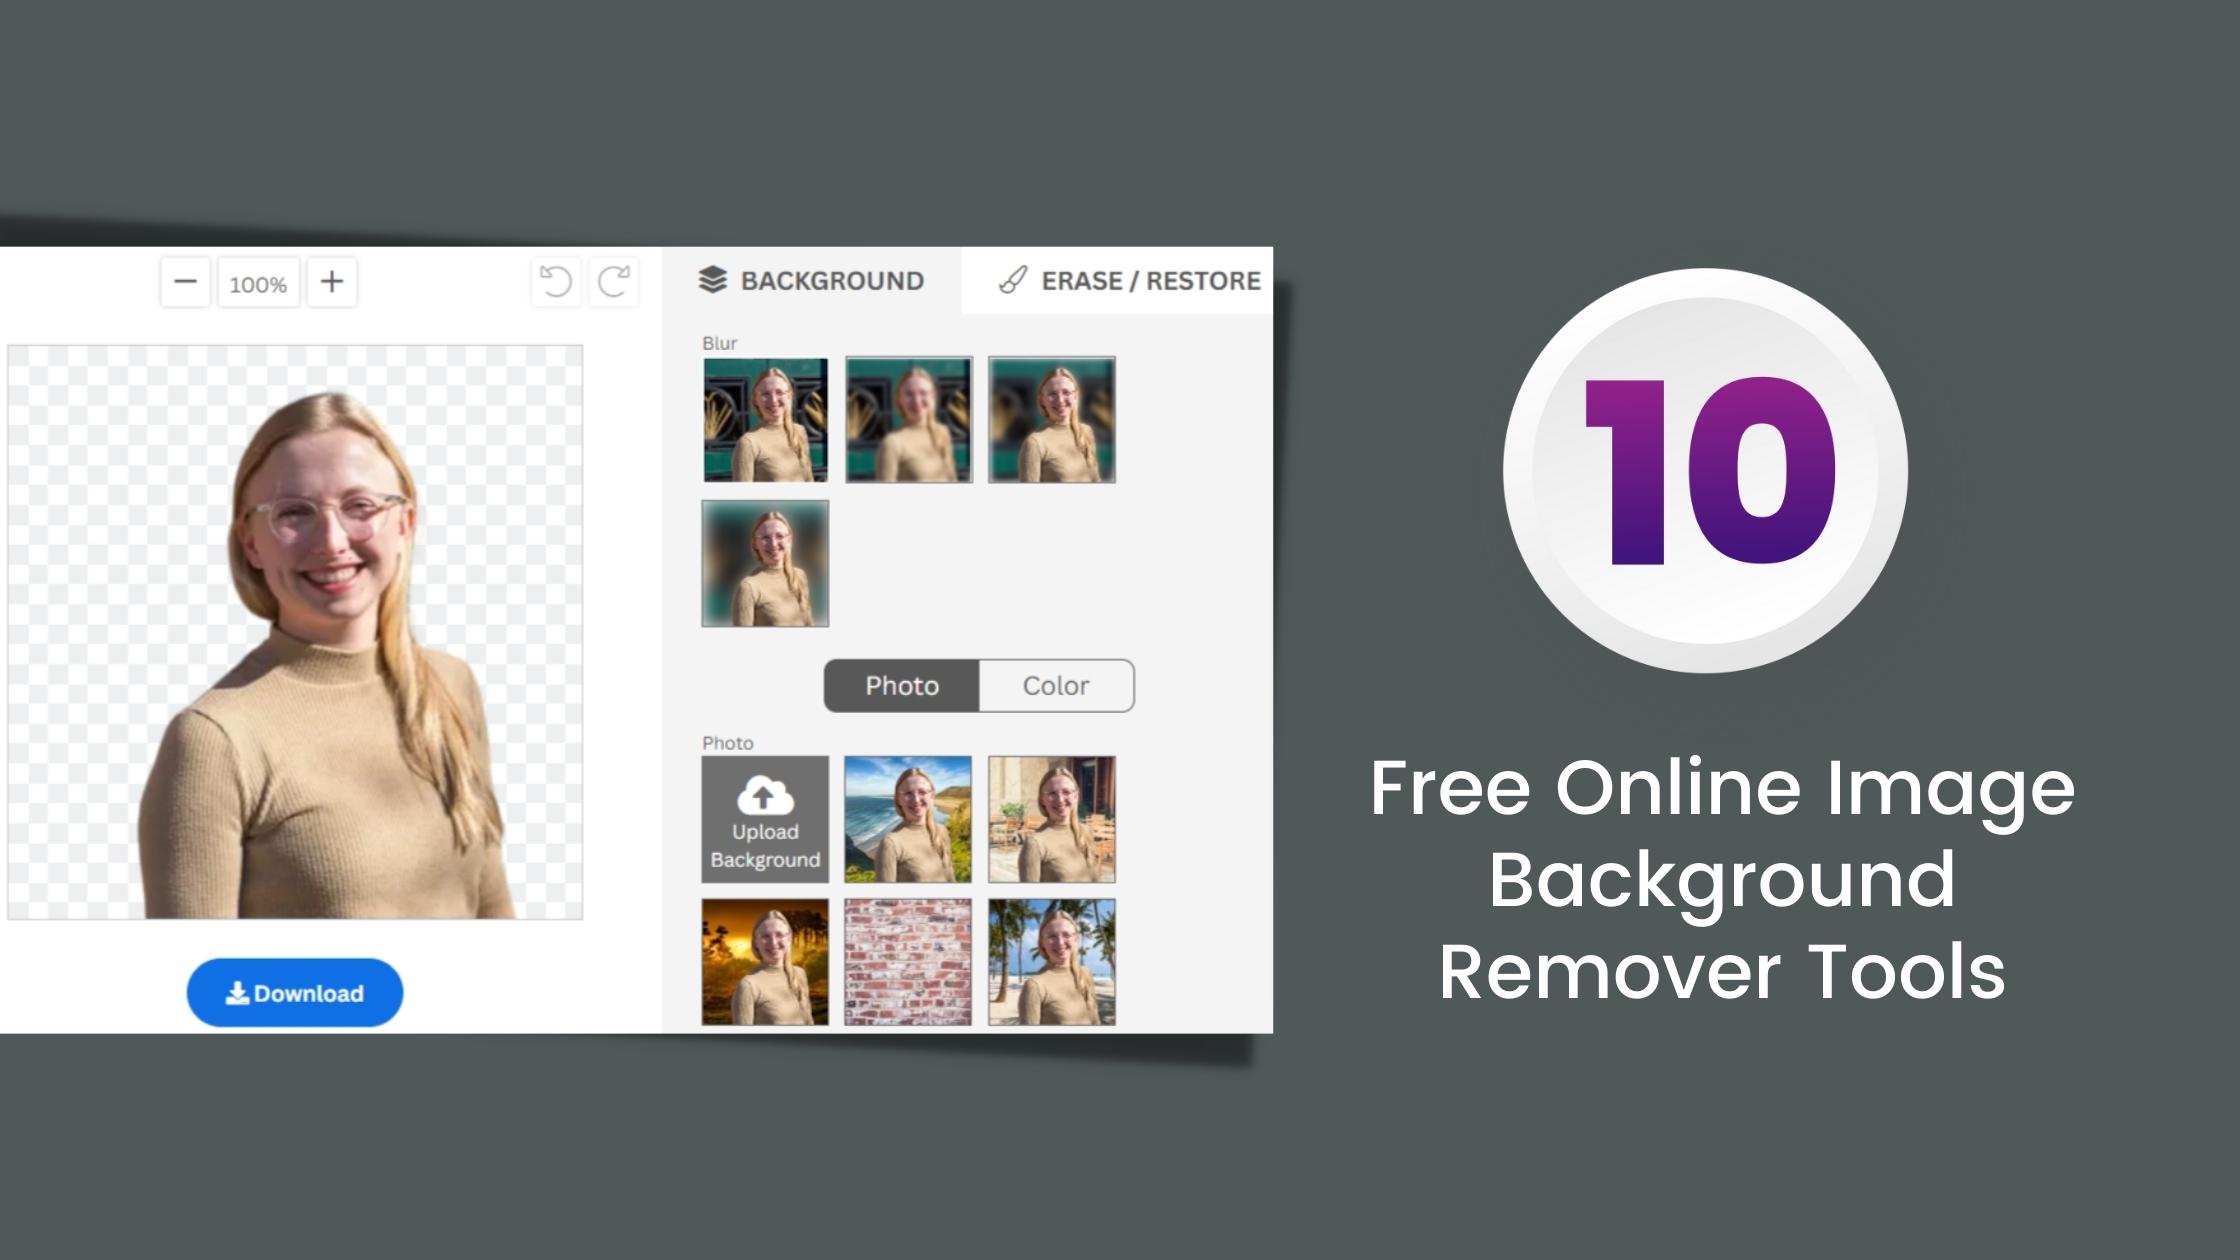 10 Free Online Image Background Remover Tools - Cloudfindr